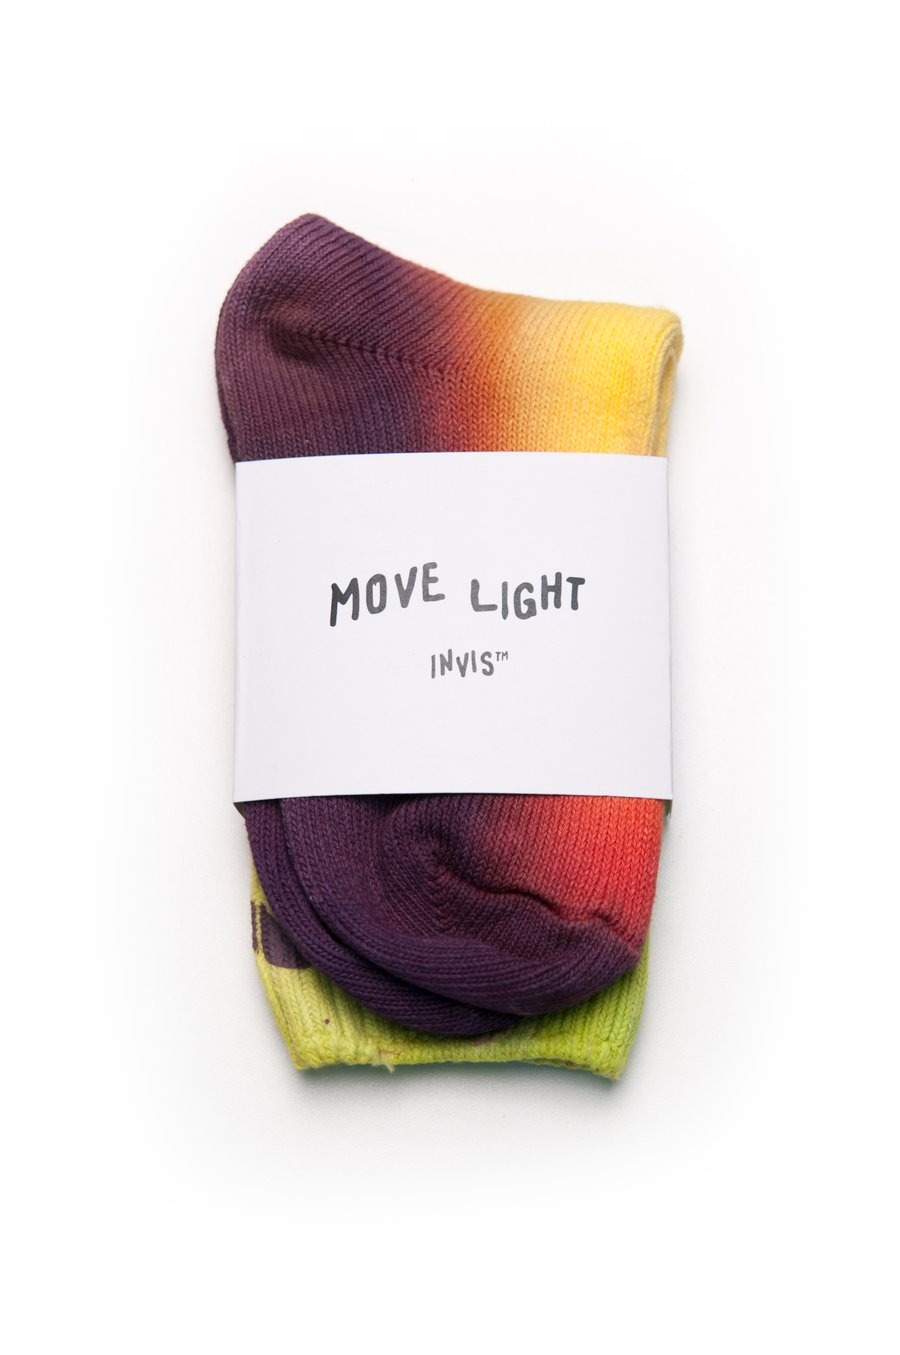 Image of “MOVE LIGHT” Sox